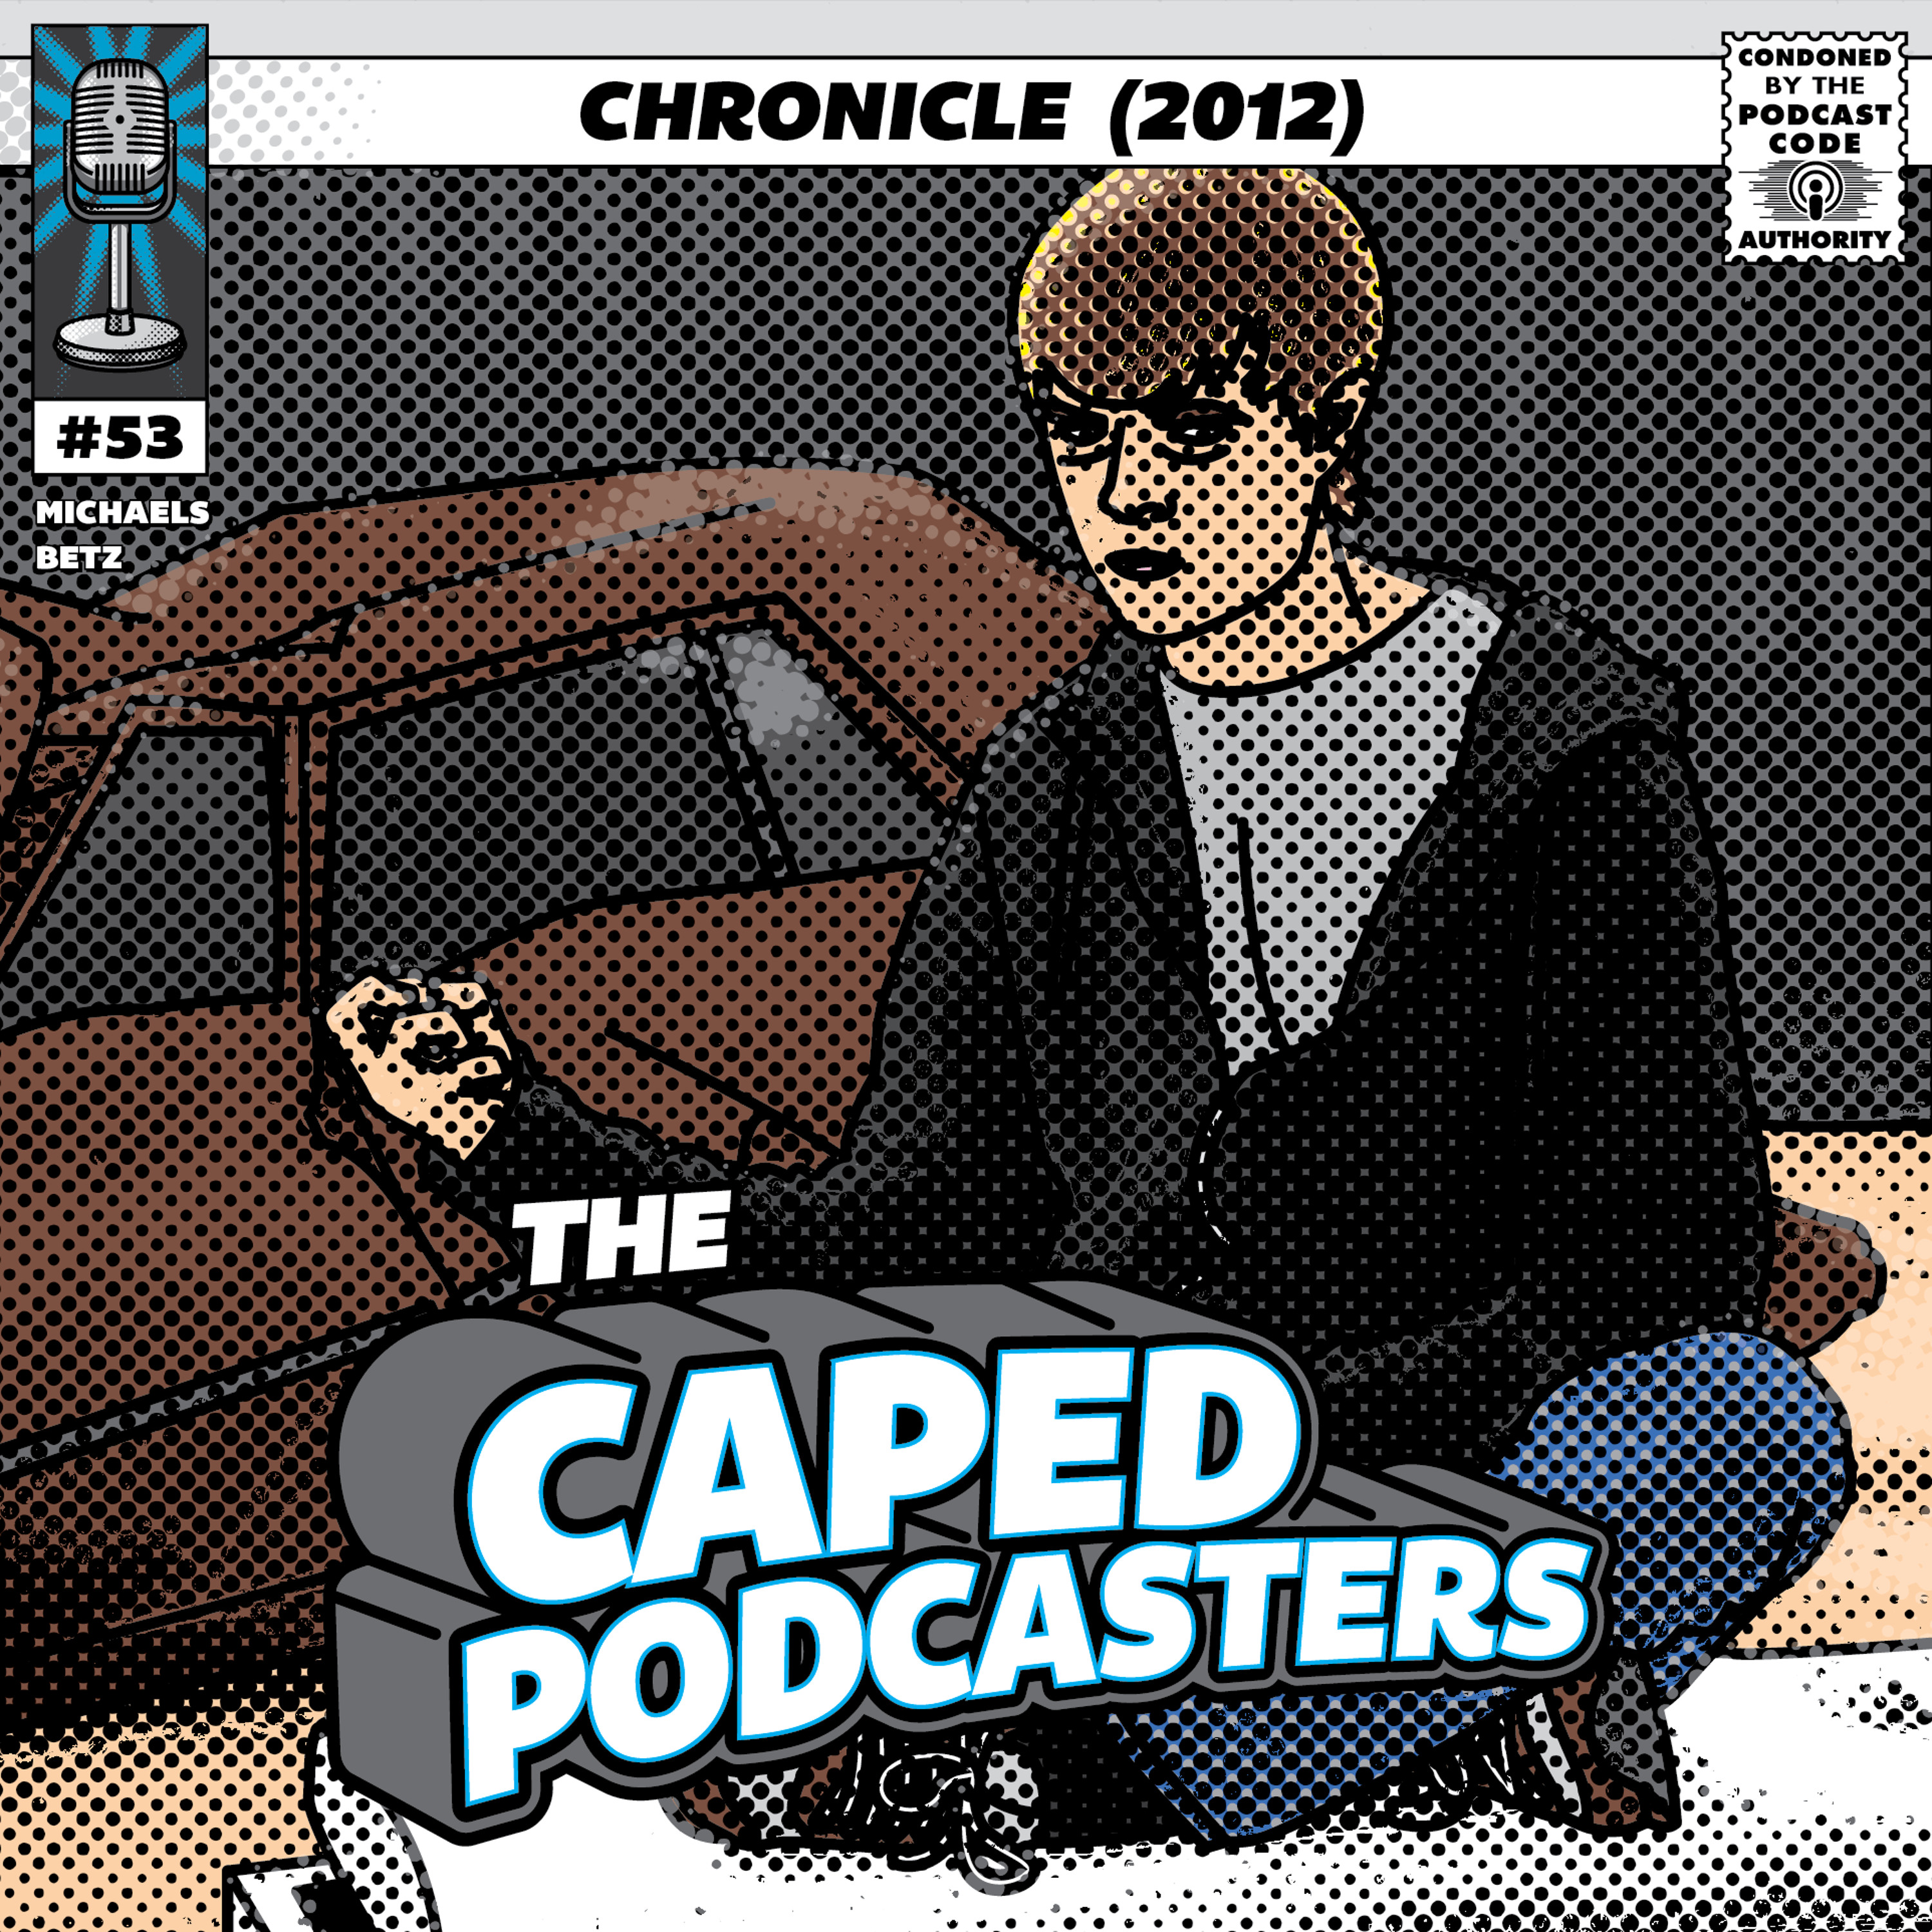 Caped Podcasters #53 - Chronicle (2012)